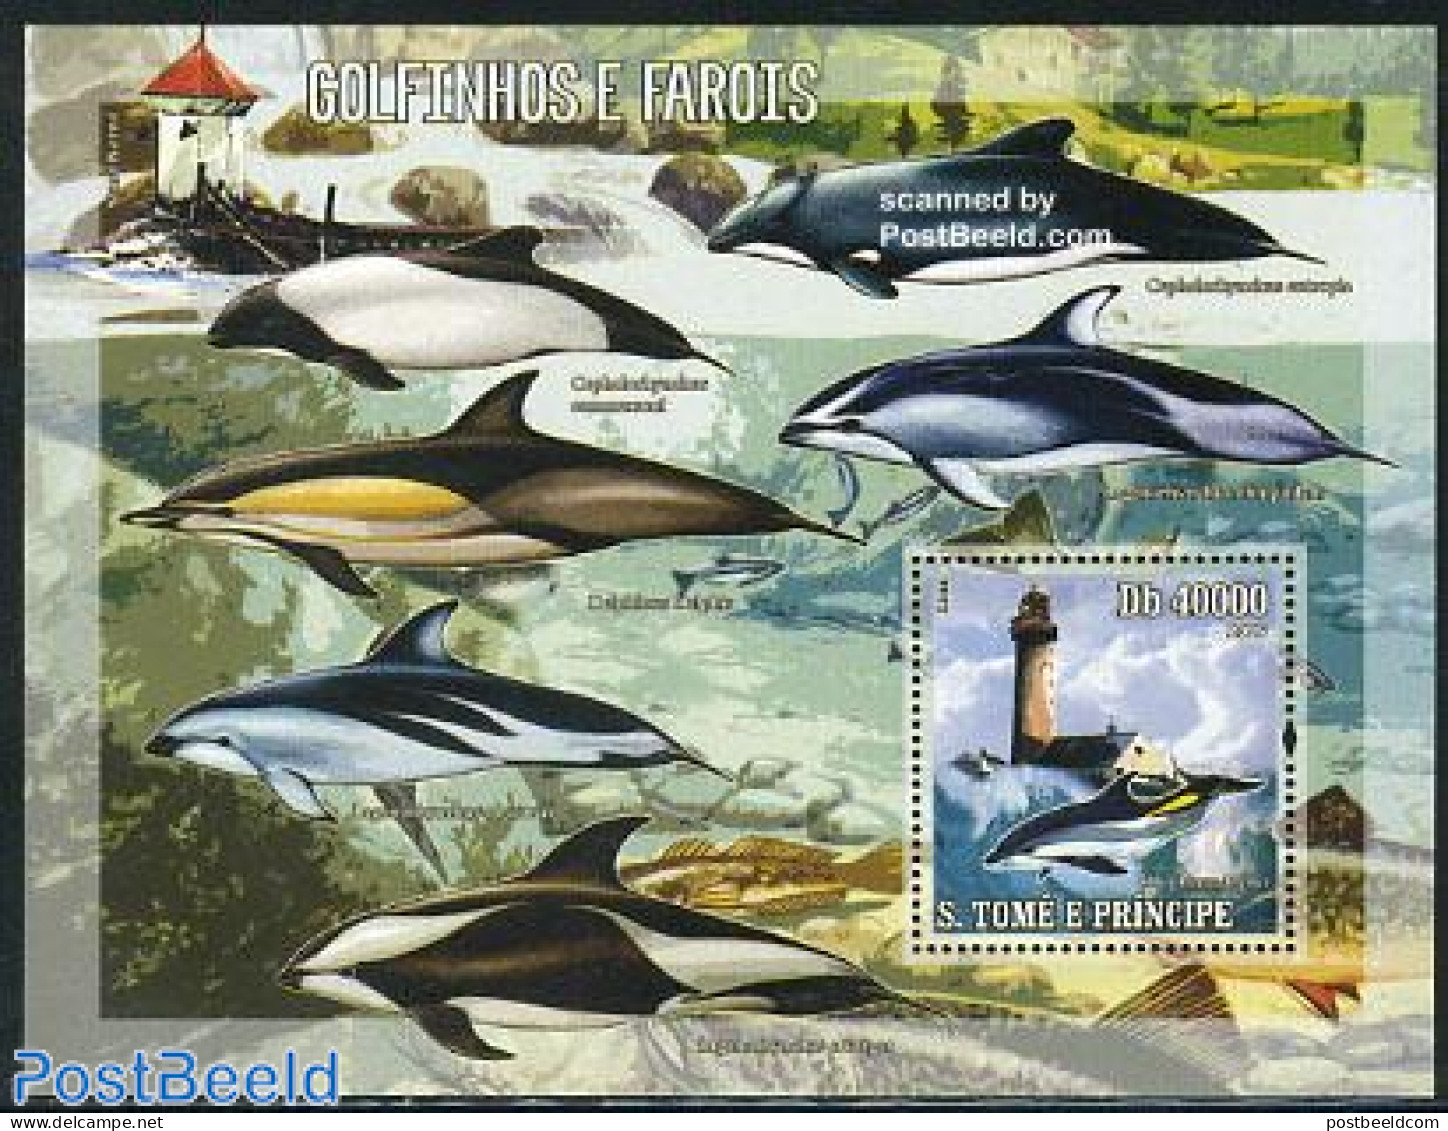 Sao Tome/Principe 2006 Lighthouse & Dolphins S/s, Mint NH, Nature - Various - Sea Mammals - Lighthouses & Safety At Sea - Leuchttürme